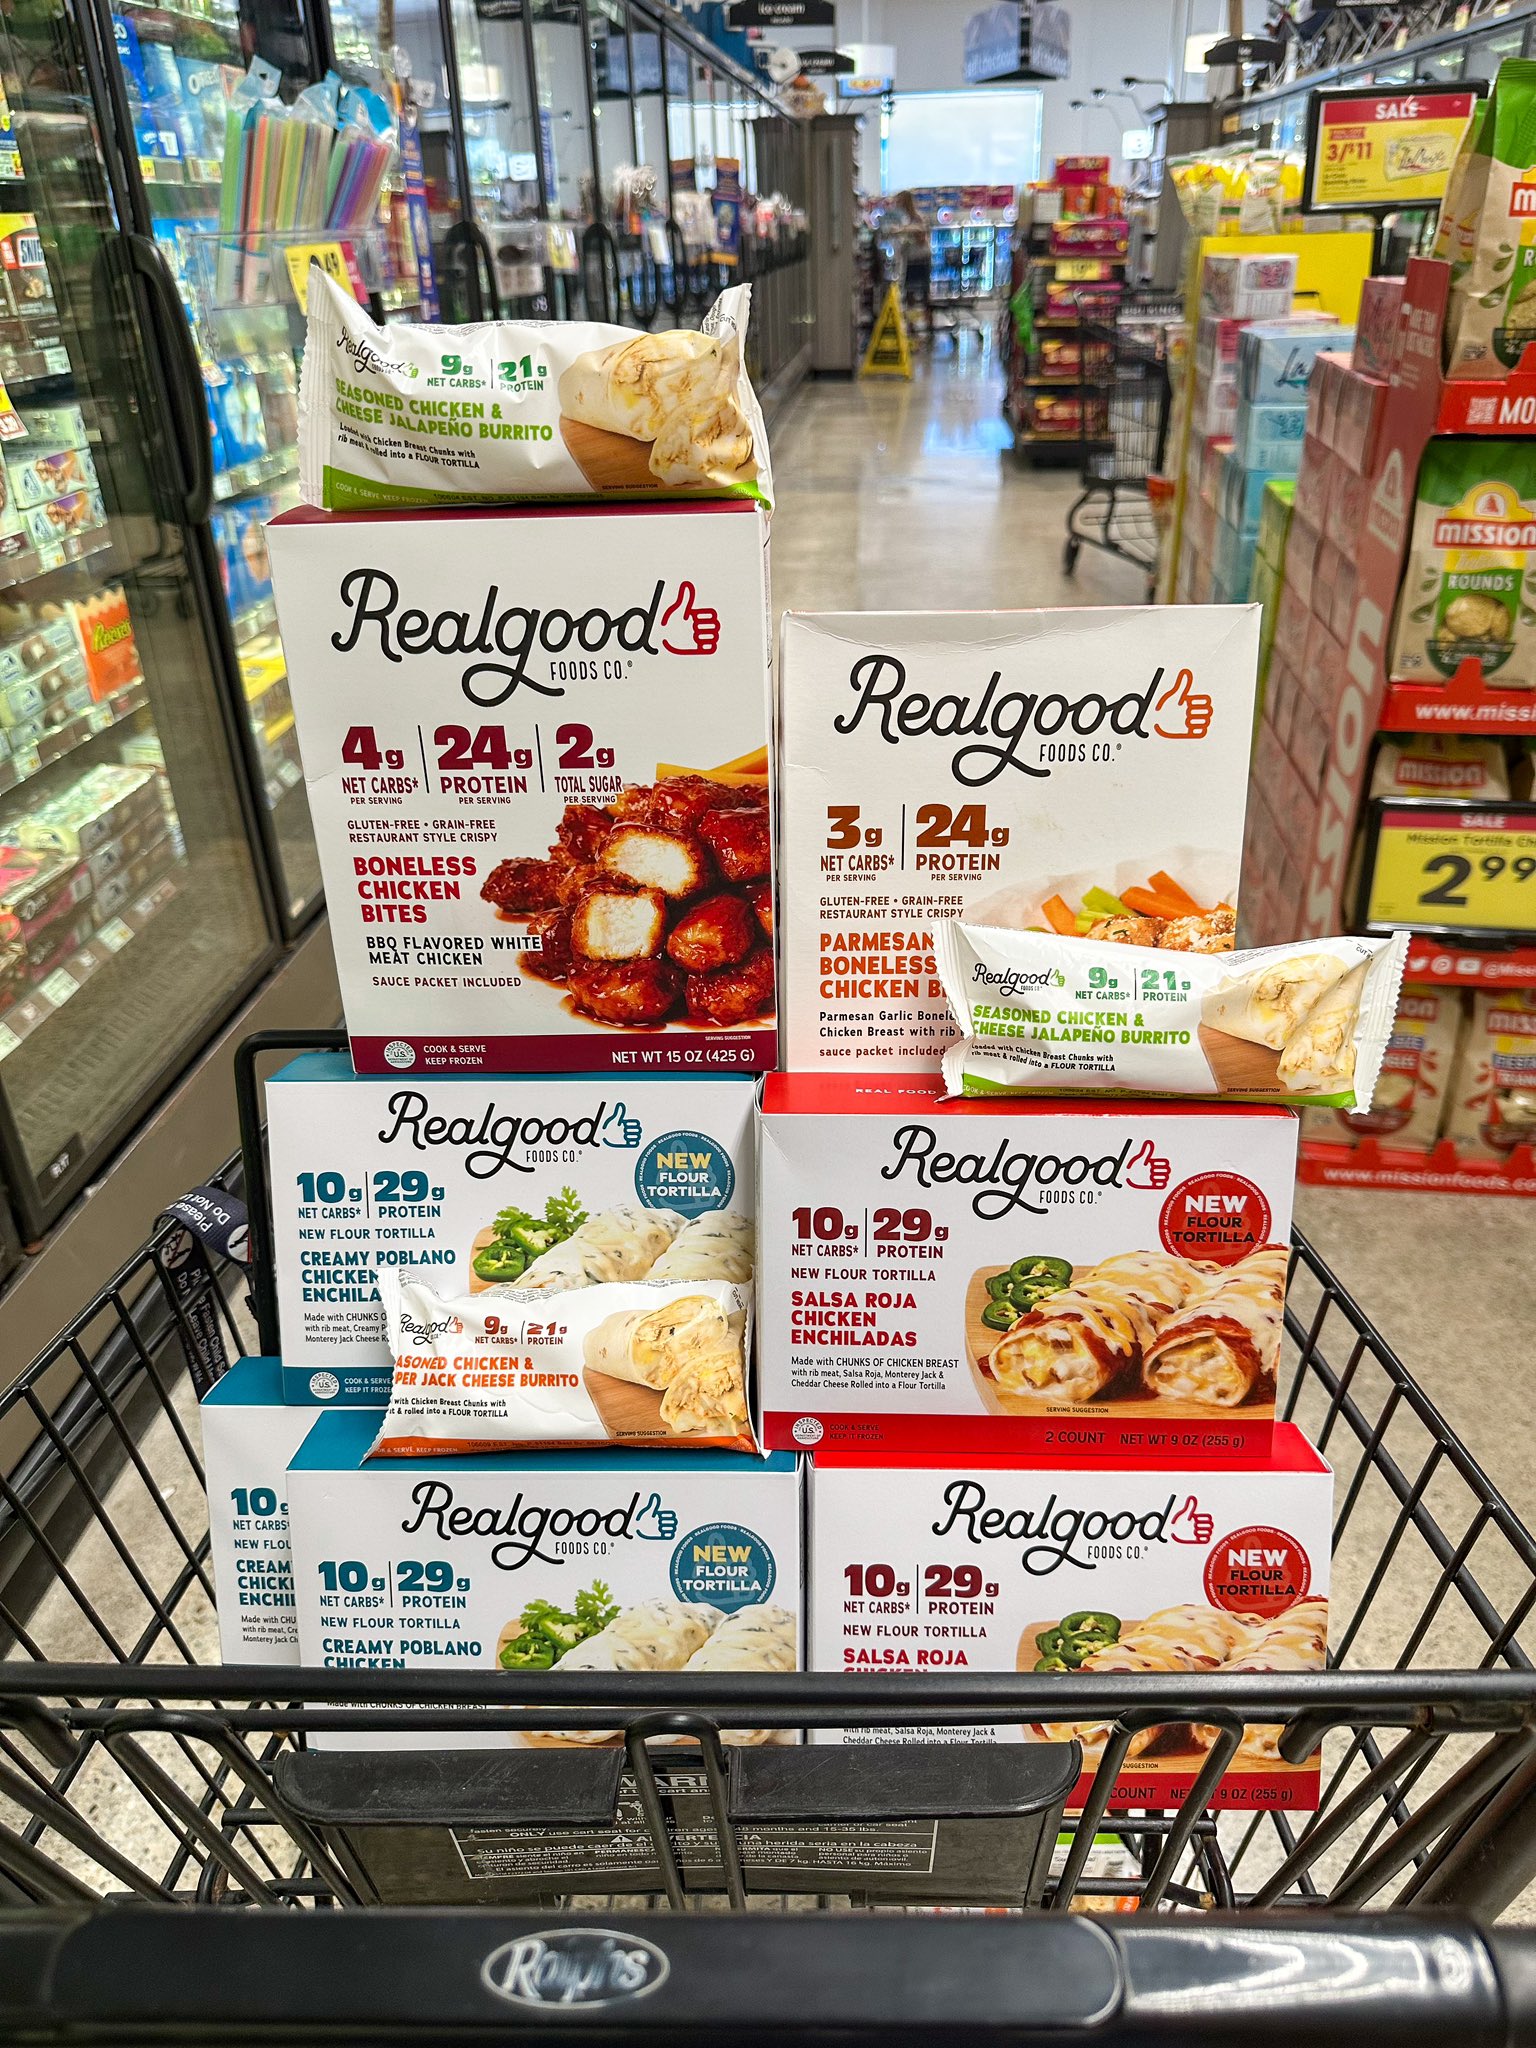 Real Good Foods (@RealGoodFoods) / X